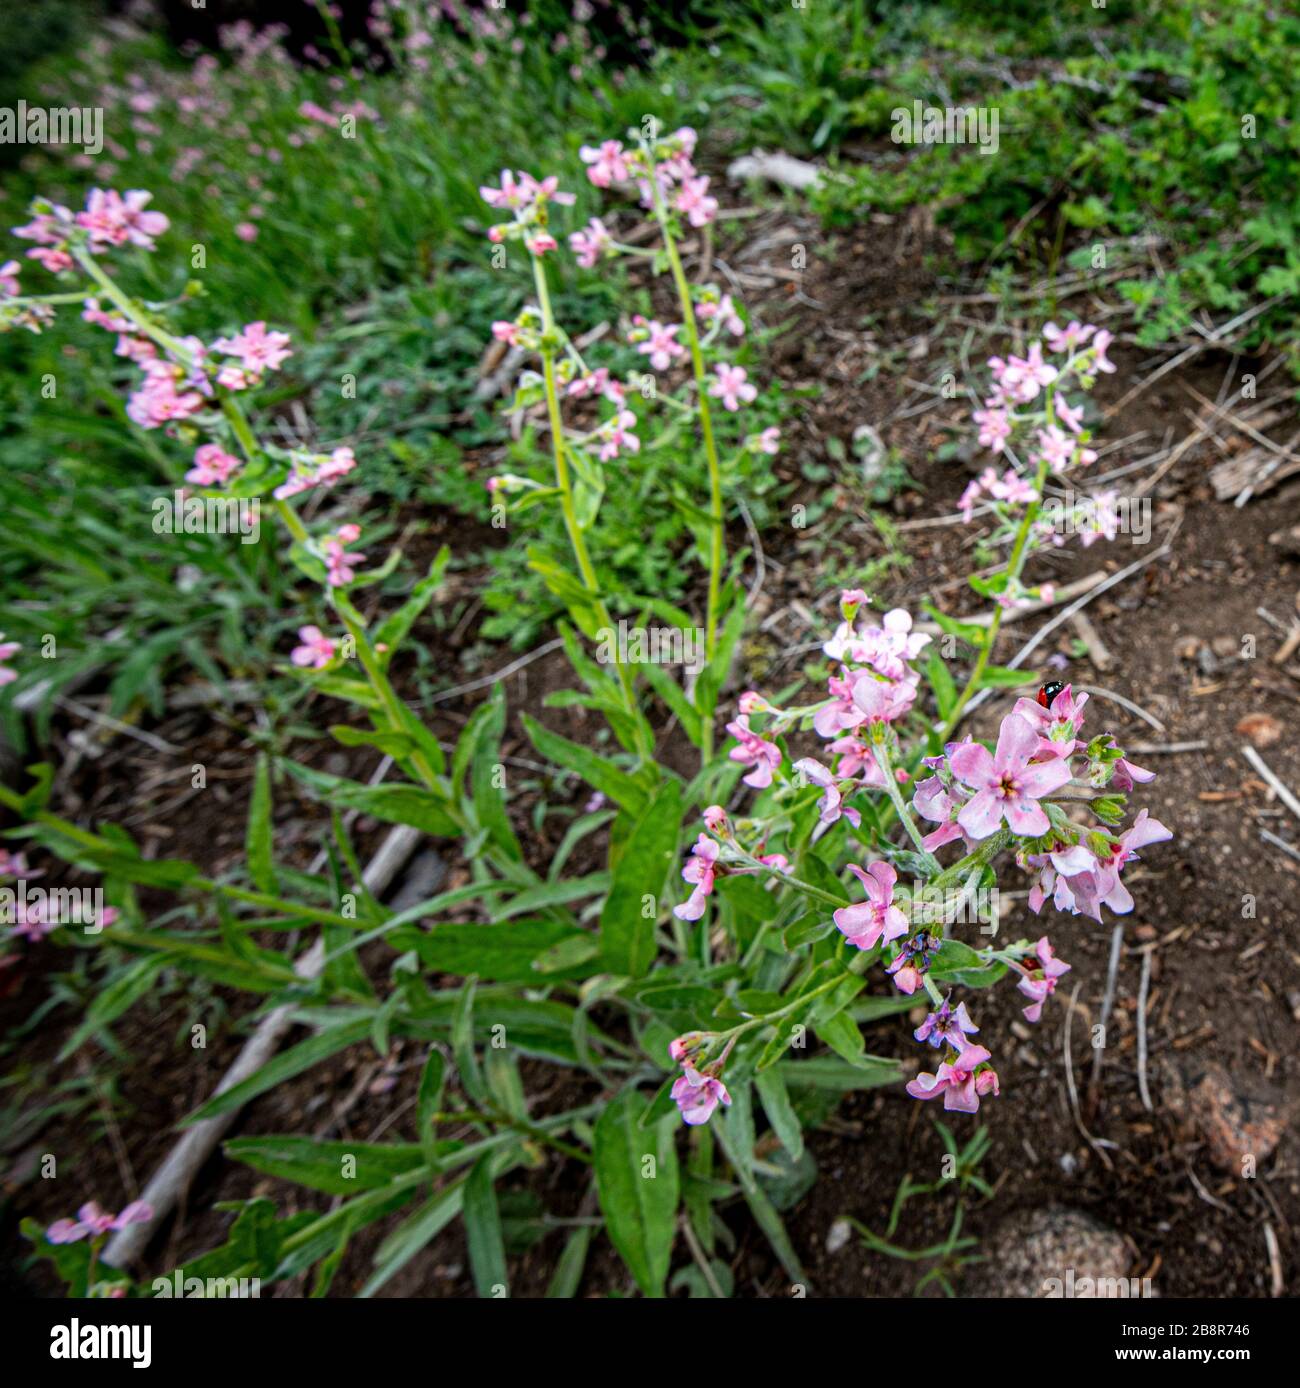 Hackelia mundula, aka pink stickseed, grows in high elevations of the Sierra Nevada mountains, photographed in Sequoia National Park. Stock Photo